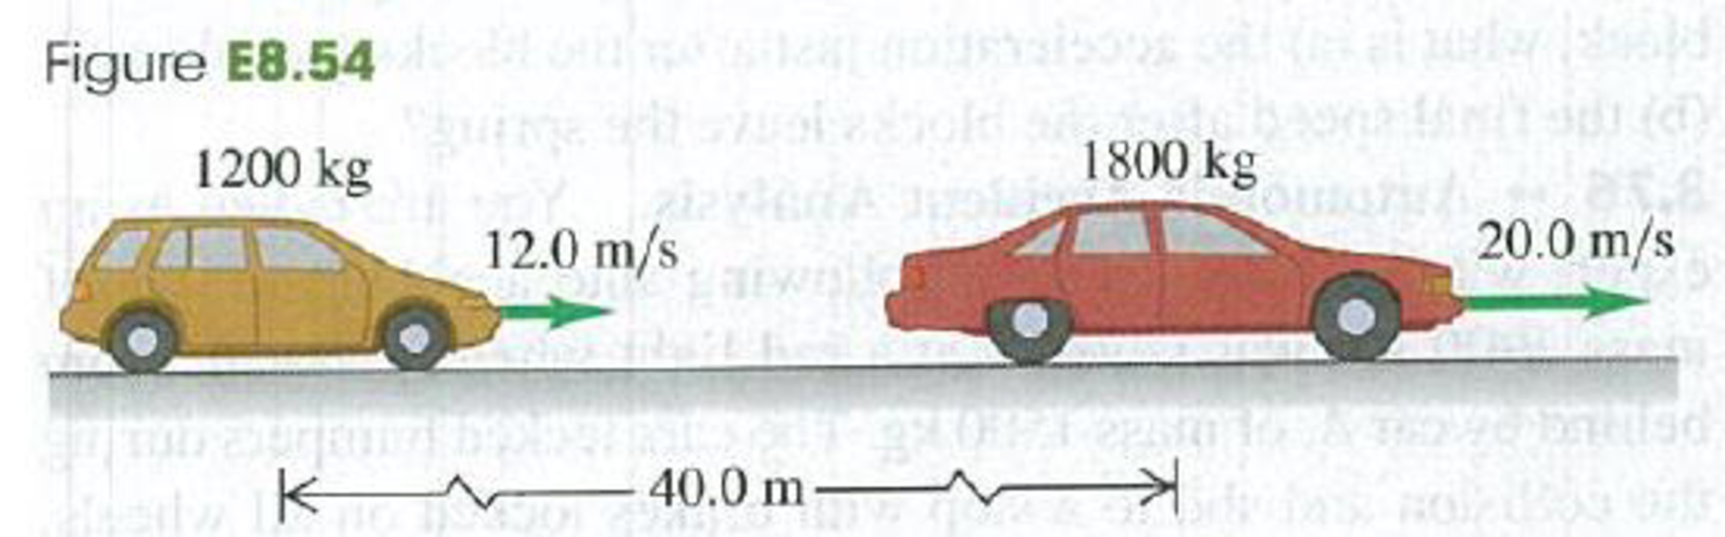 Chapter 8, Problem 8.54E, A 1200-kg SUV is moving along a straight highway at 12.0 m/s. Another car, with mass 1800 kg and 